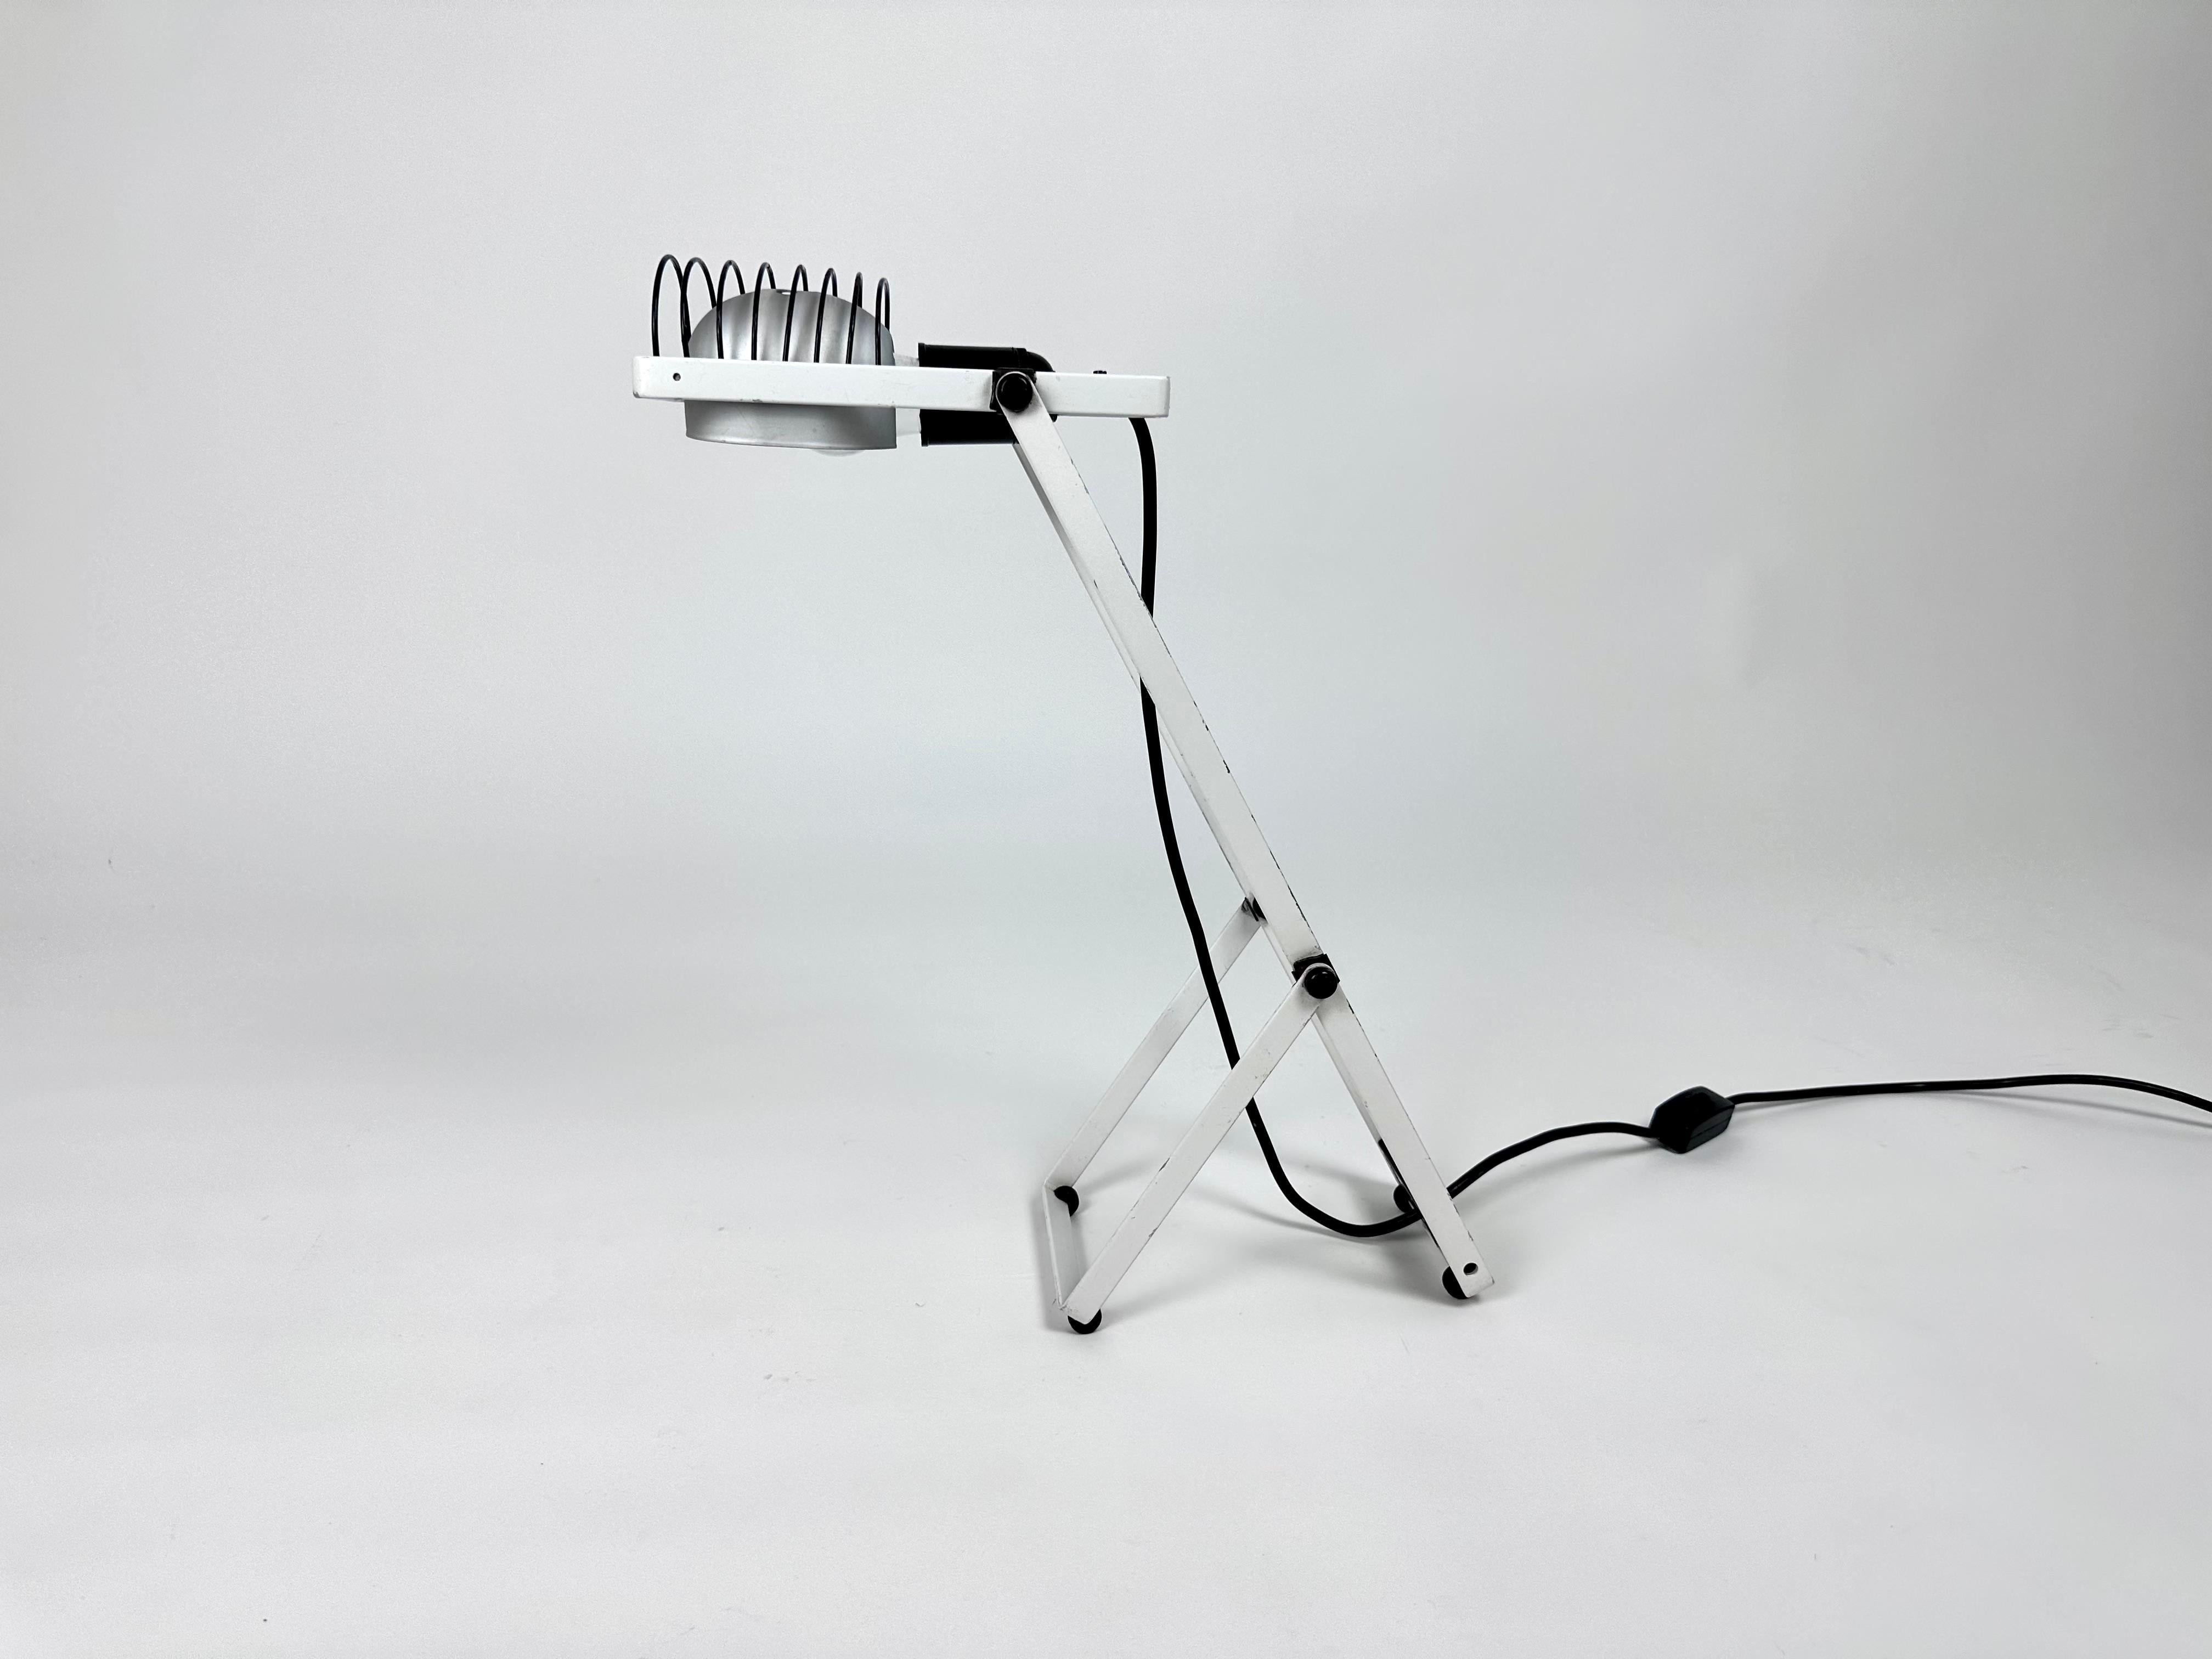 1970s desk lamp by Italian lighting manufacturer Artemide, designed by company founder Ernesto Gismondi.

As featured in the permanent collection of the Metropolitan Museum of Art, NY. This is the original design, first edition without the aluminium